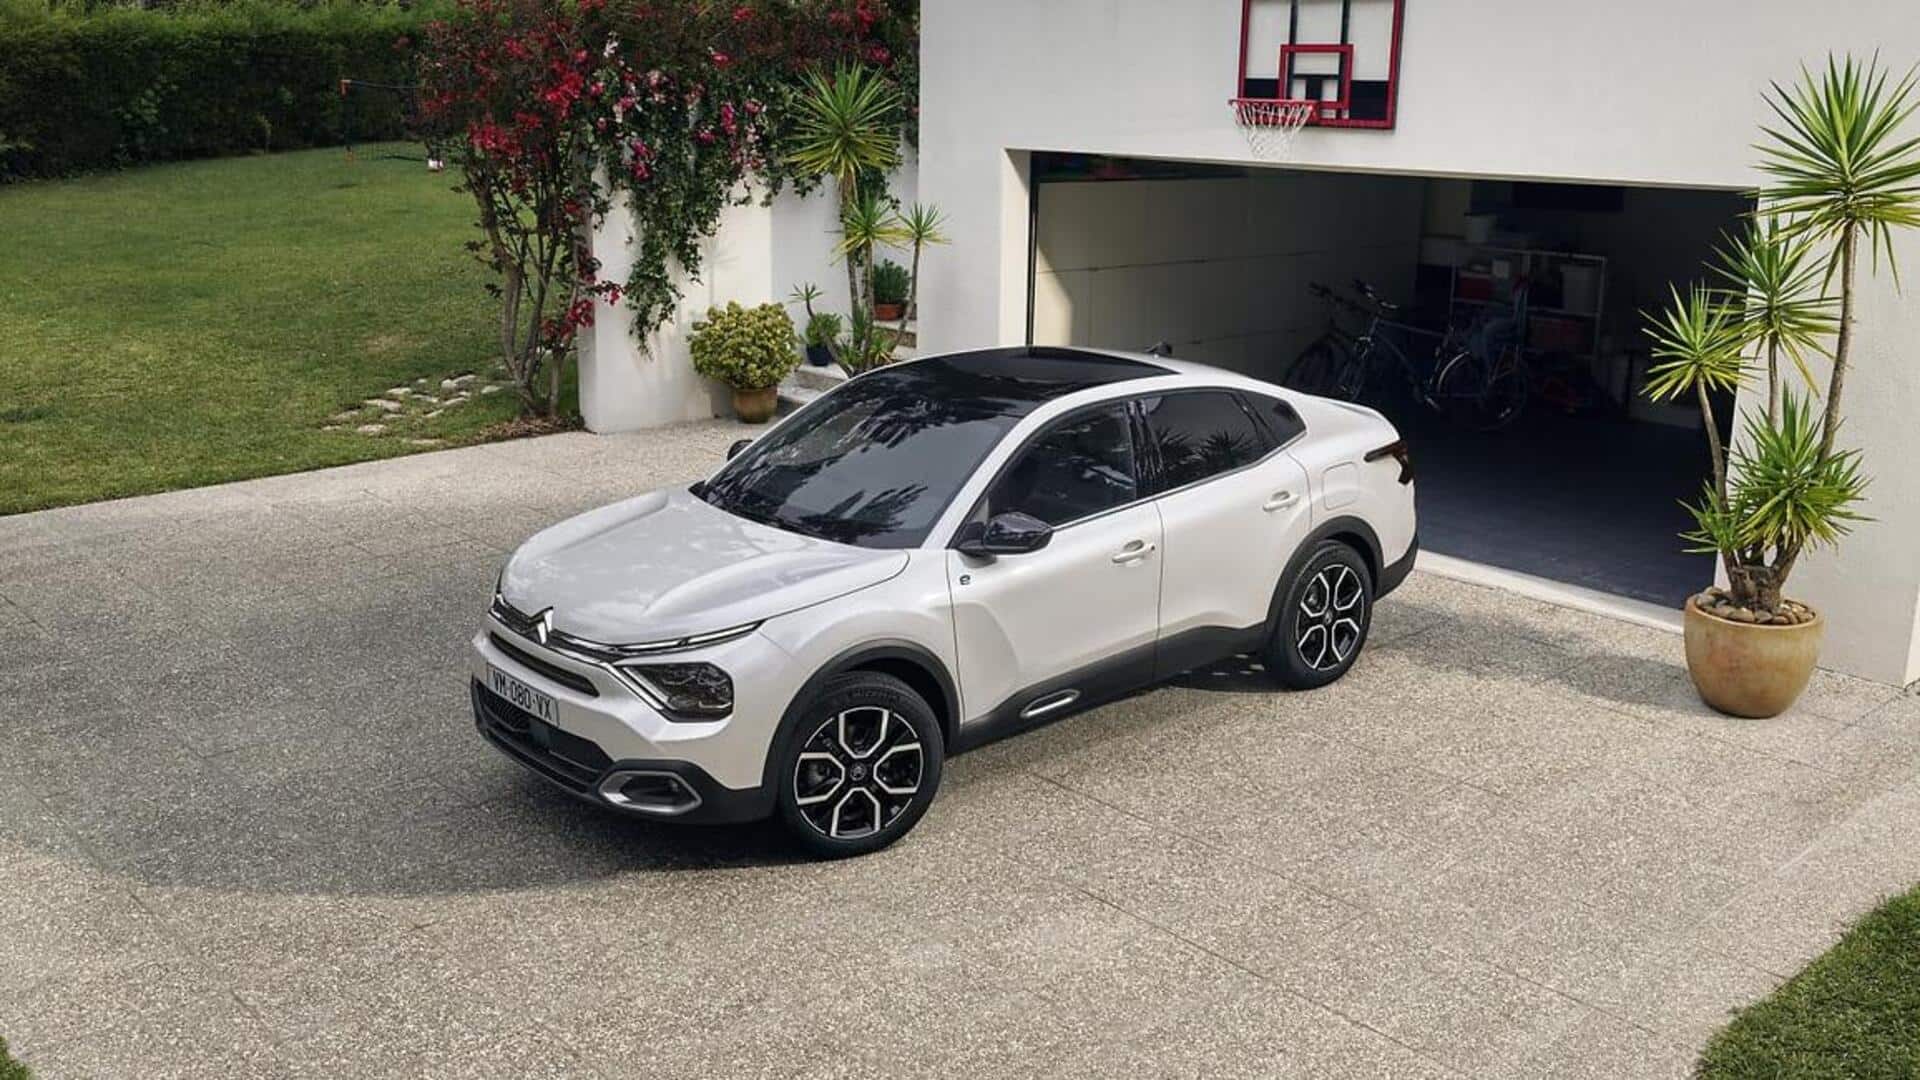 Citroen is developing C3X notchback for India: What to expect